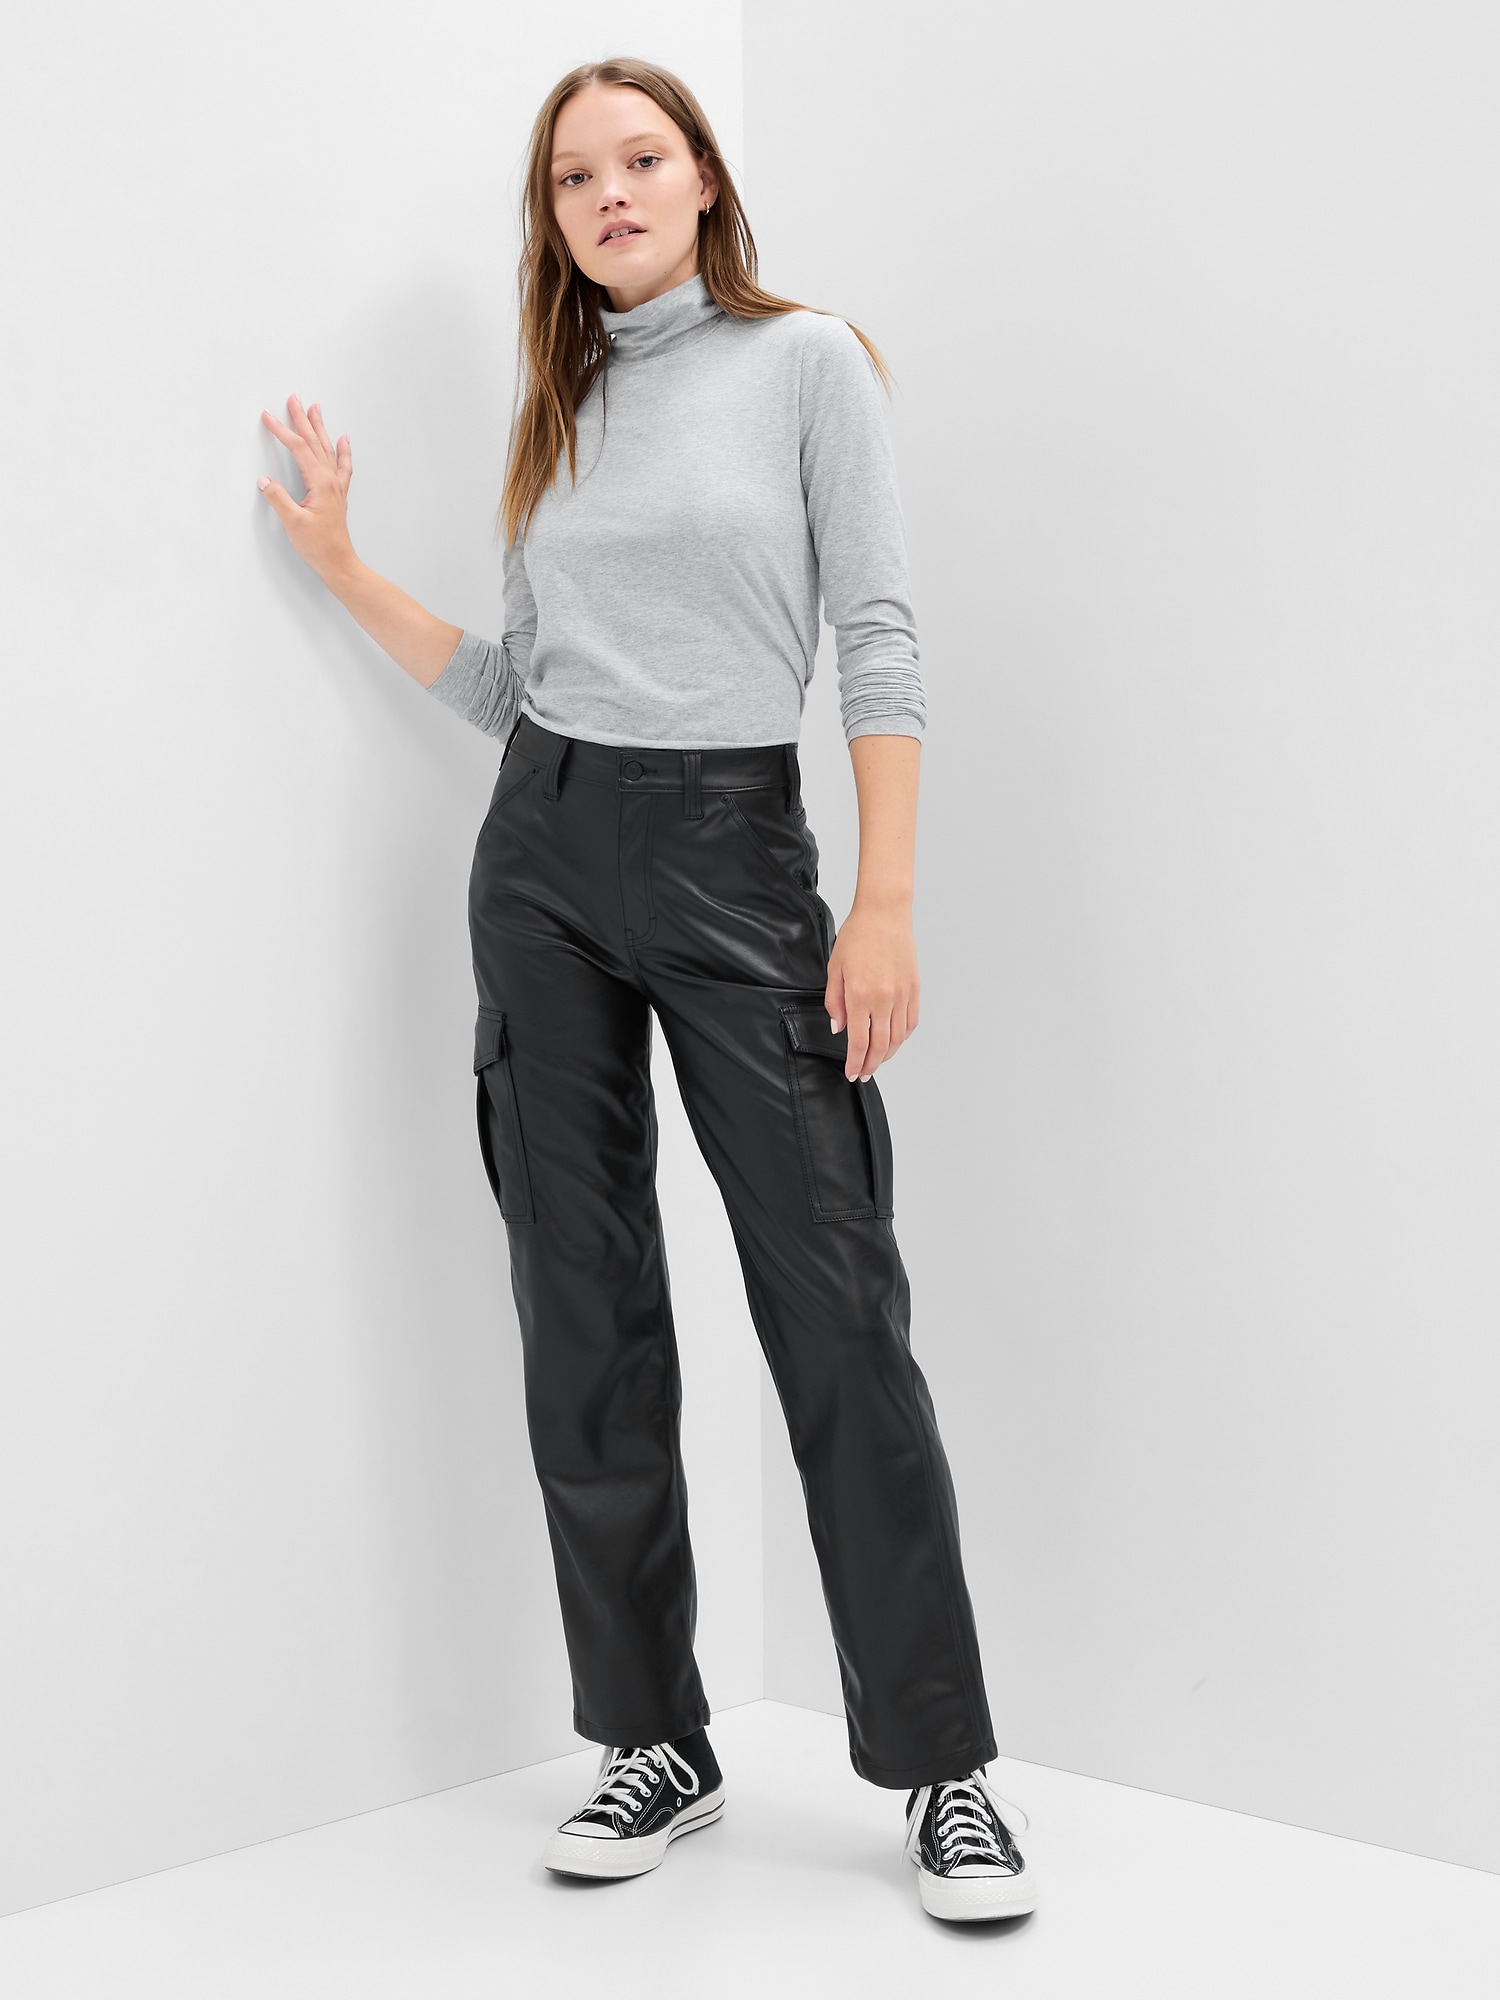 Loose Cargo Pants For Women